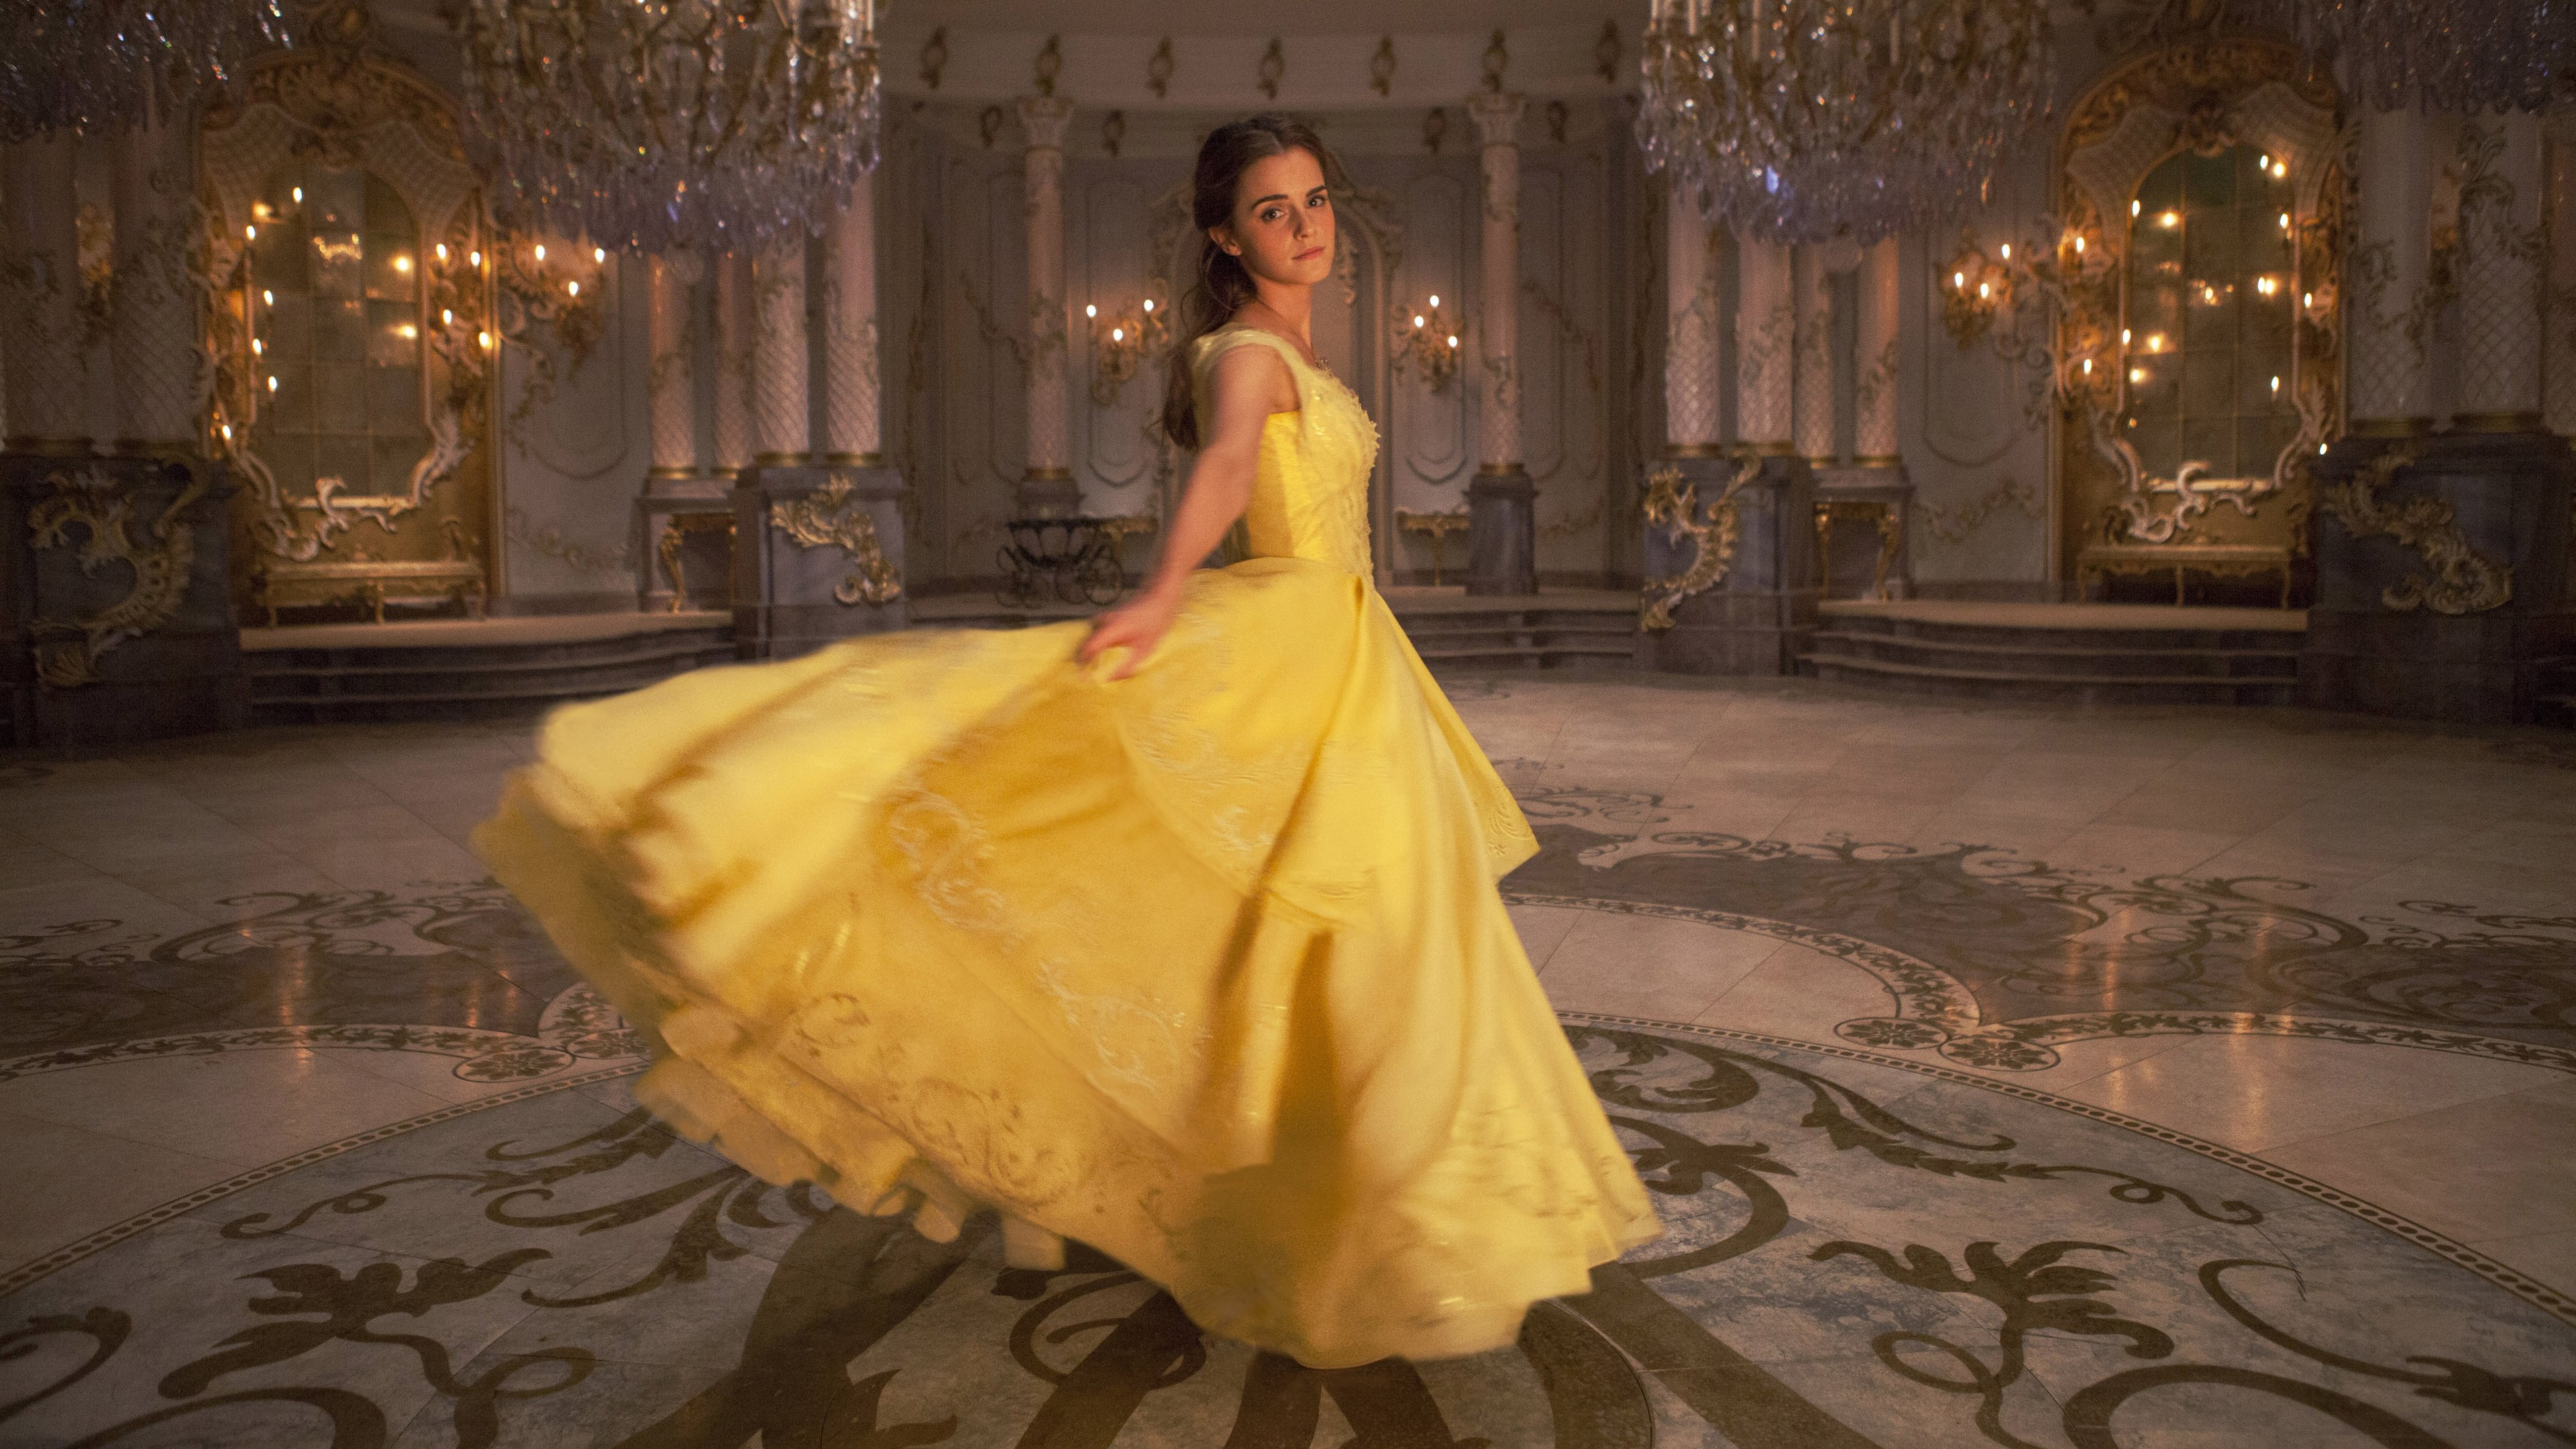 emma watson in beauty and the beast 1536400499 - Emma Watson In Beauty And The Beast - emma watson wallpapers, beauty and the beast wallpapers, 5k wallpapers, 2017 movies wallpapers